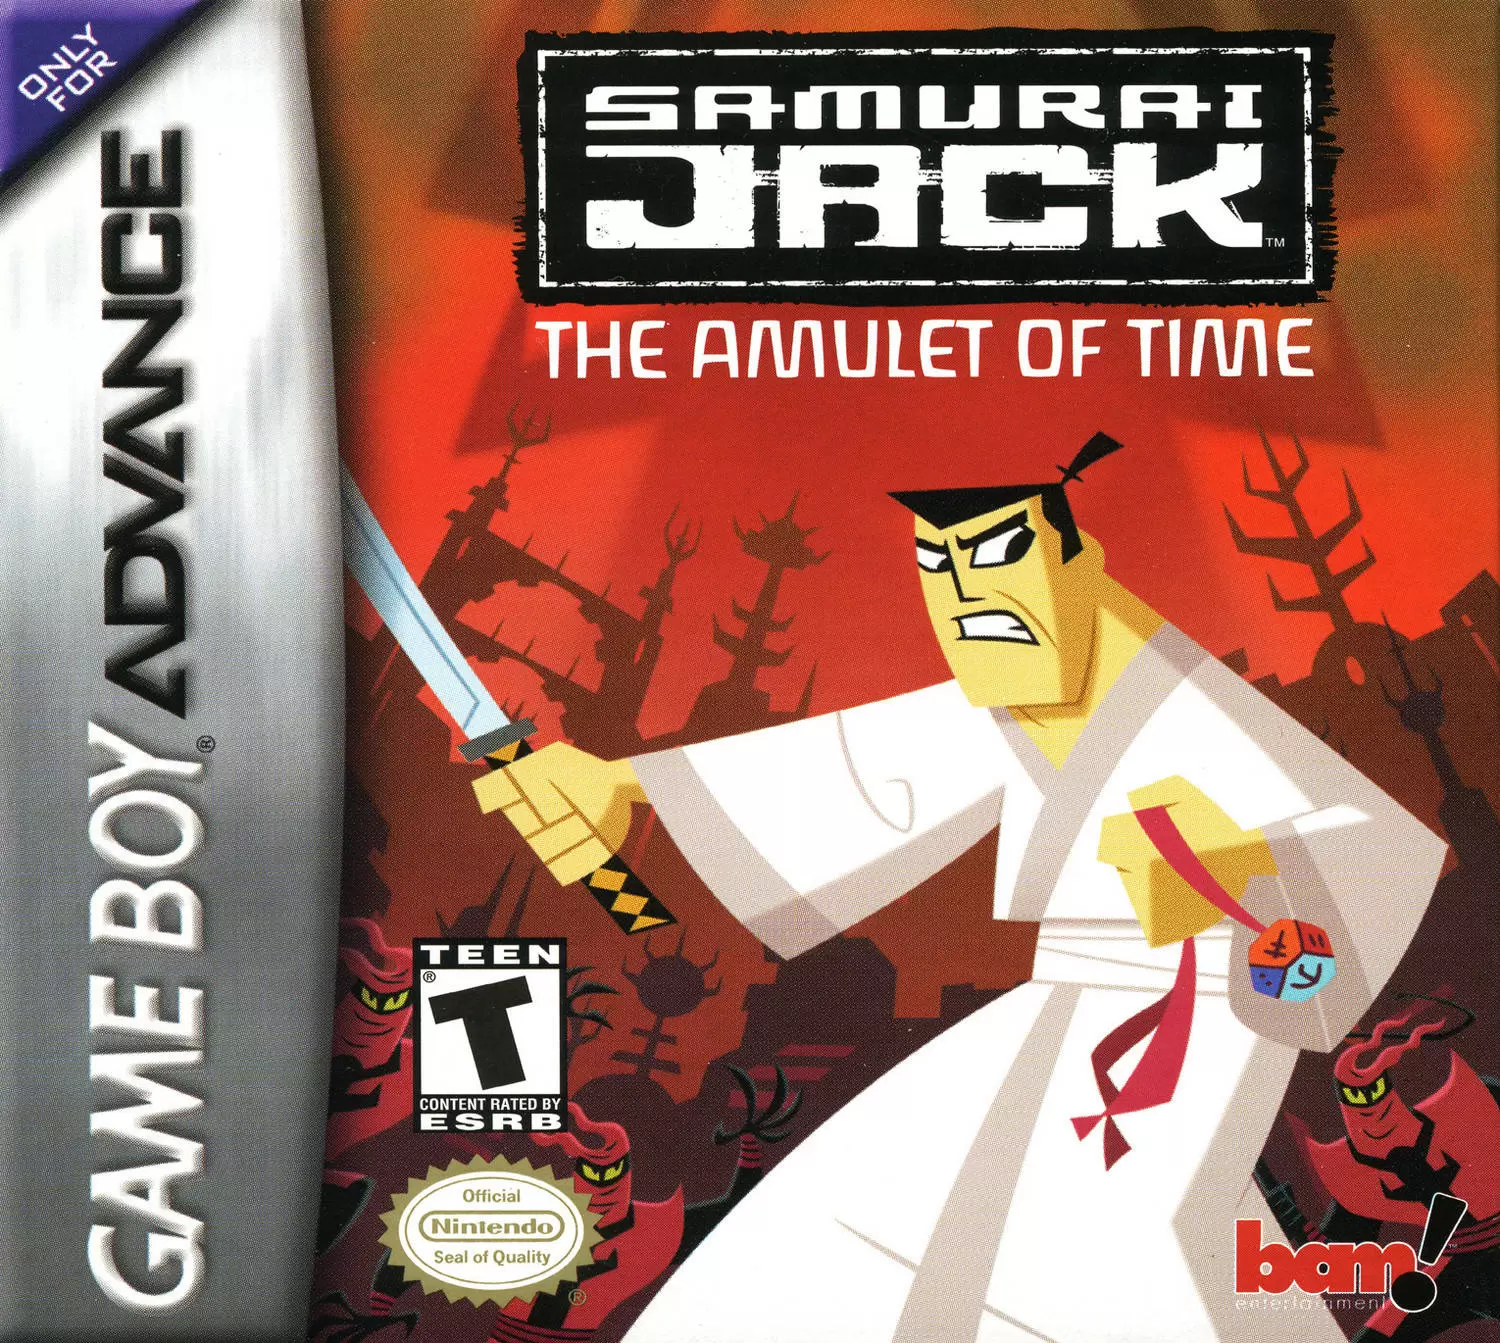 Game Boy Advance Games - Samurai Jack: The Amulet of Time